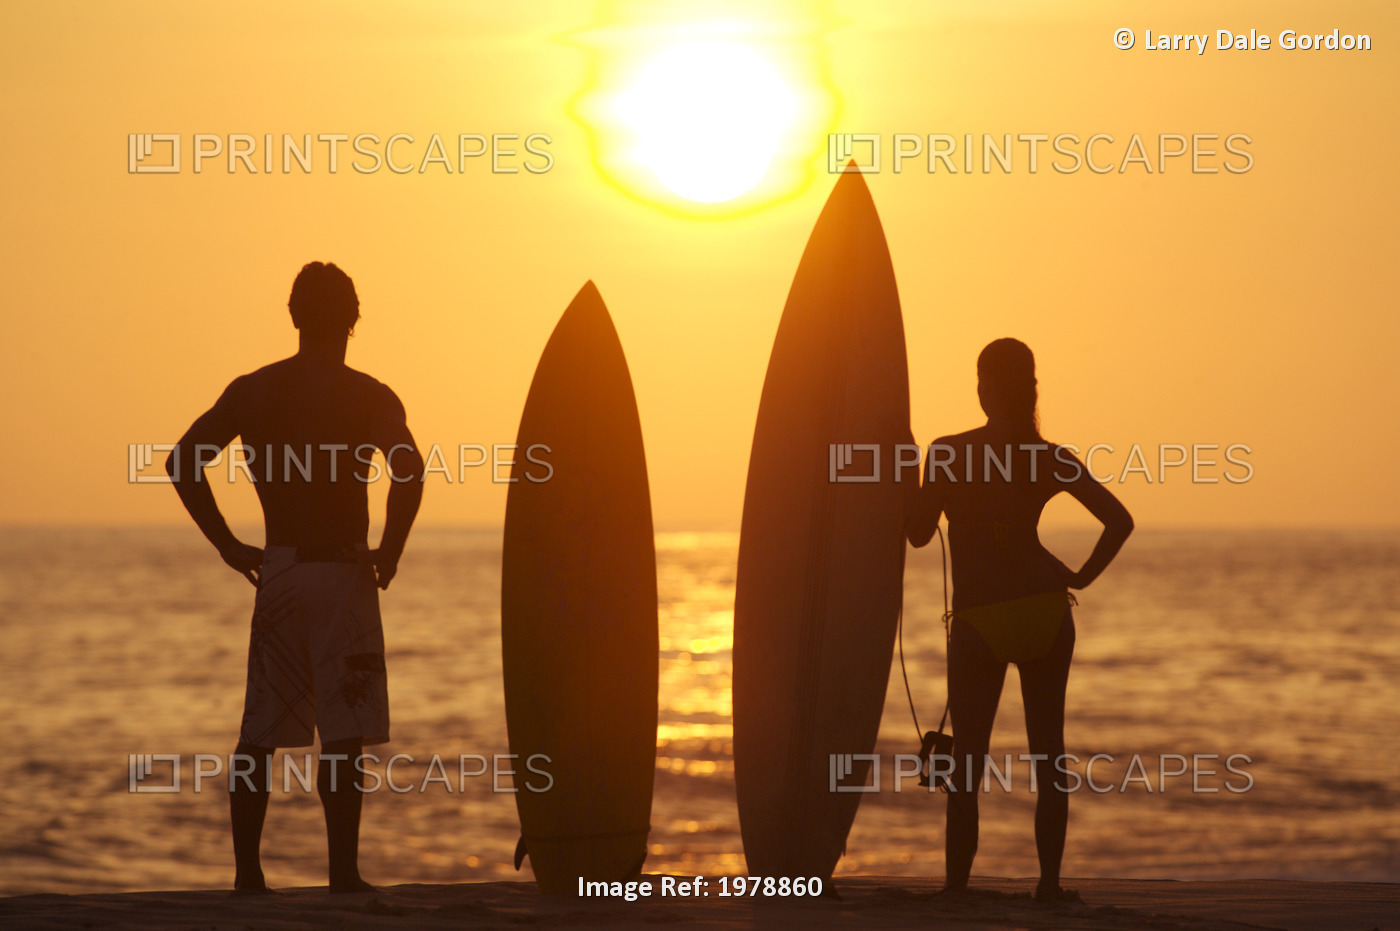 Hawaii, Oahu, Silhouette Of Man And Woman On Beach With Surfboards At Sunset.